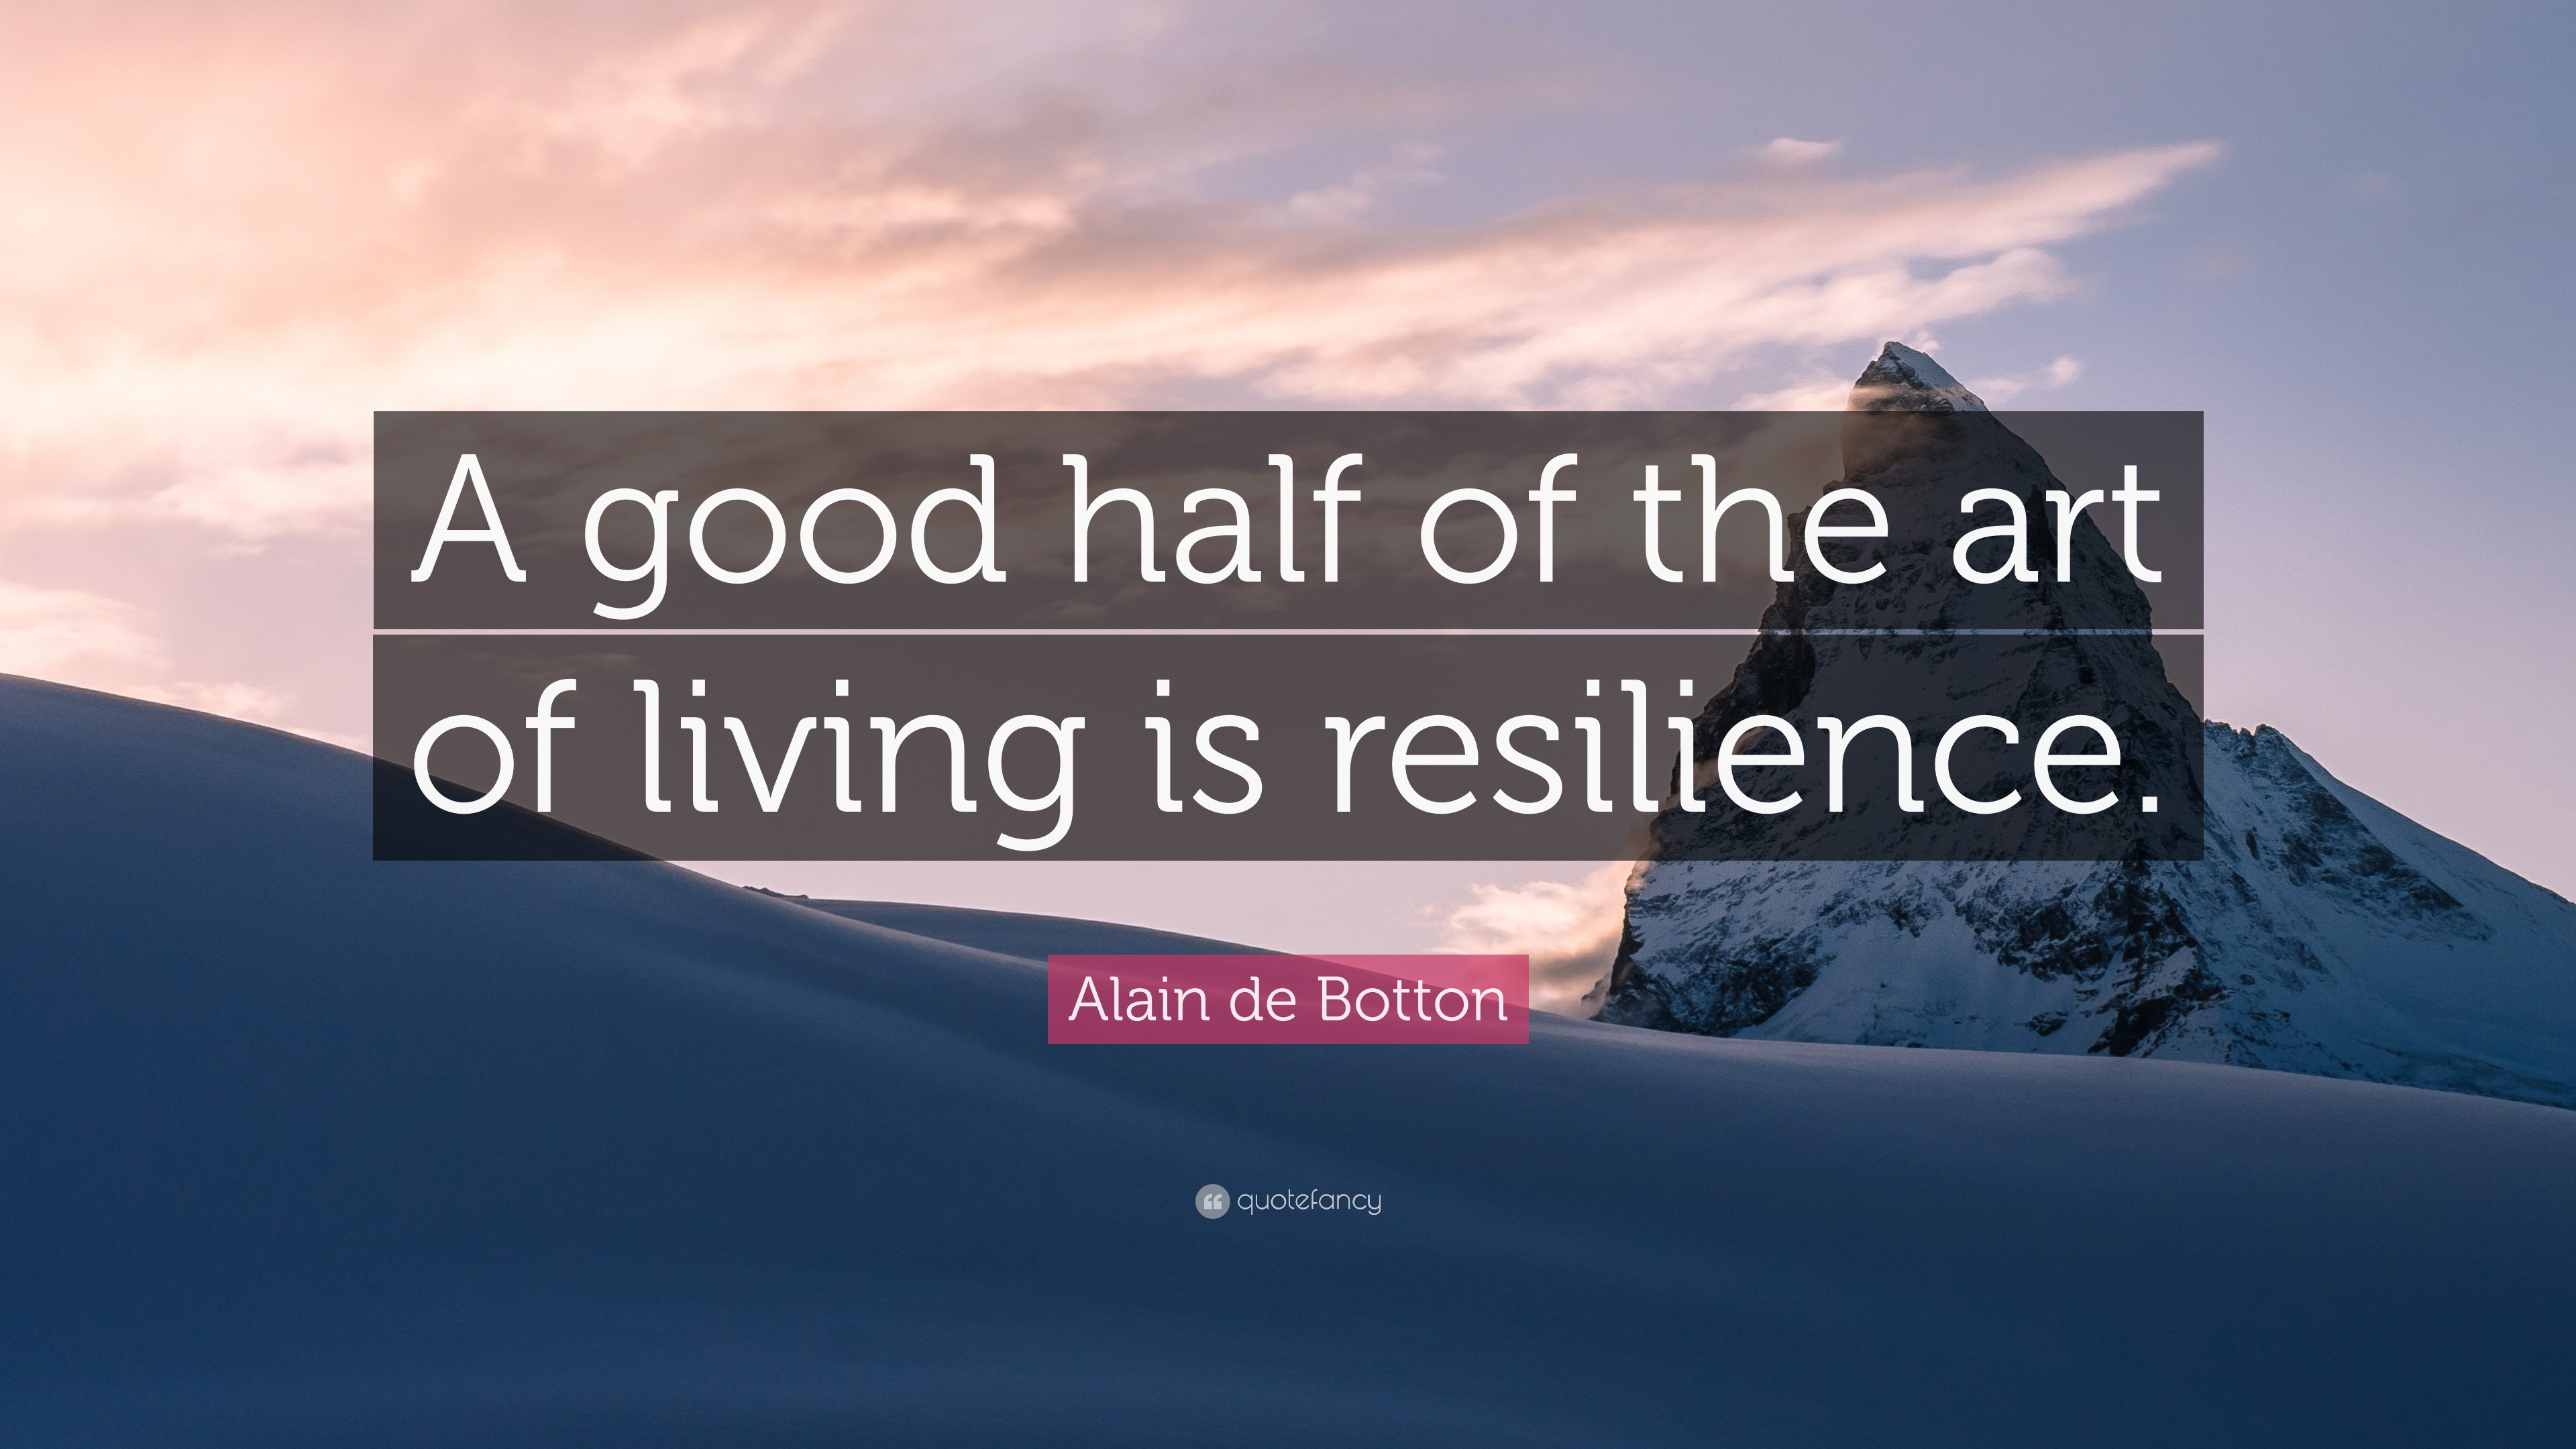 Alain de Botton Quote: “A good half of the art of living is resilience.”